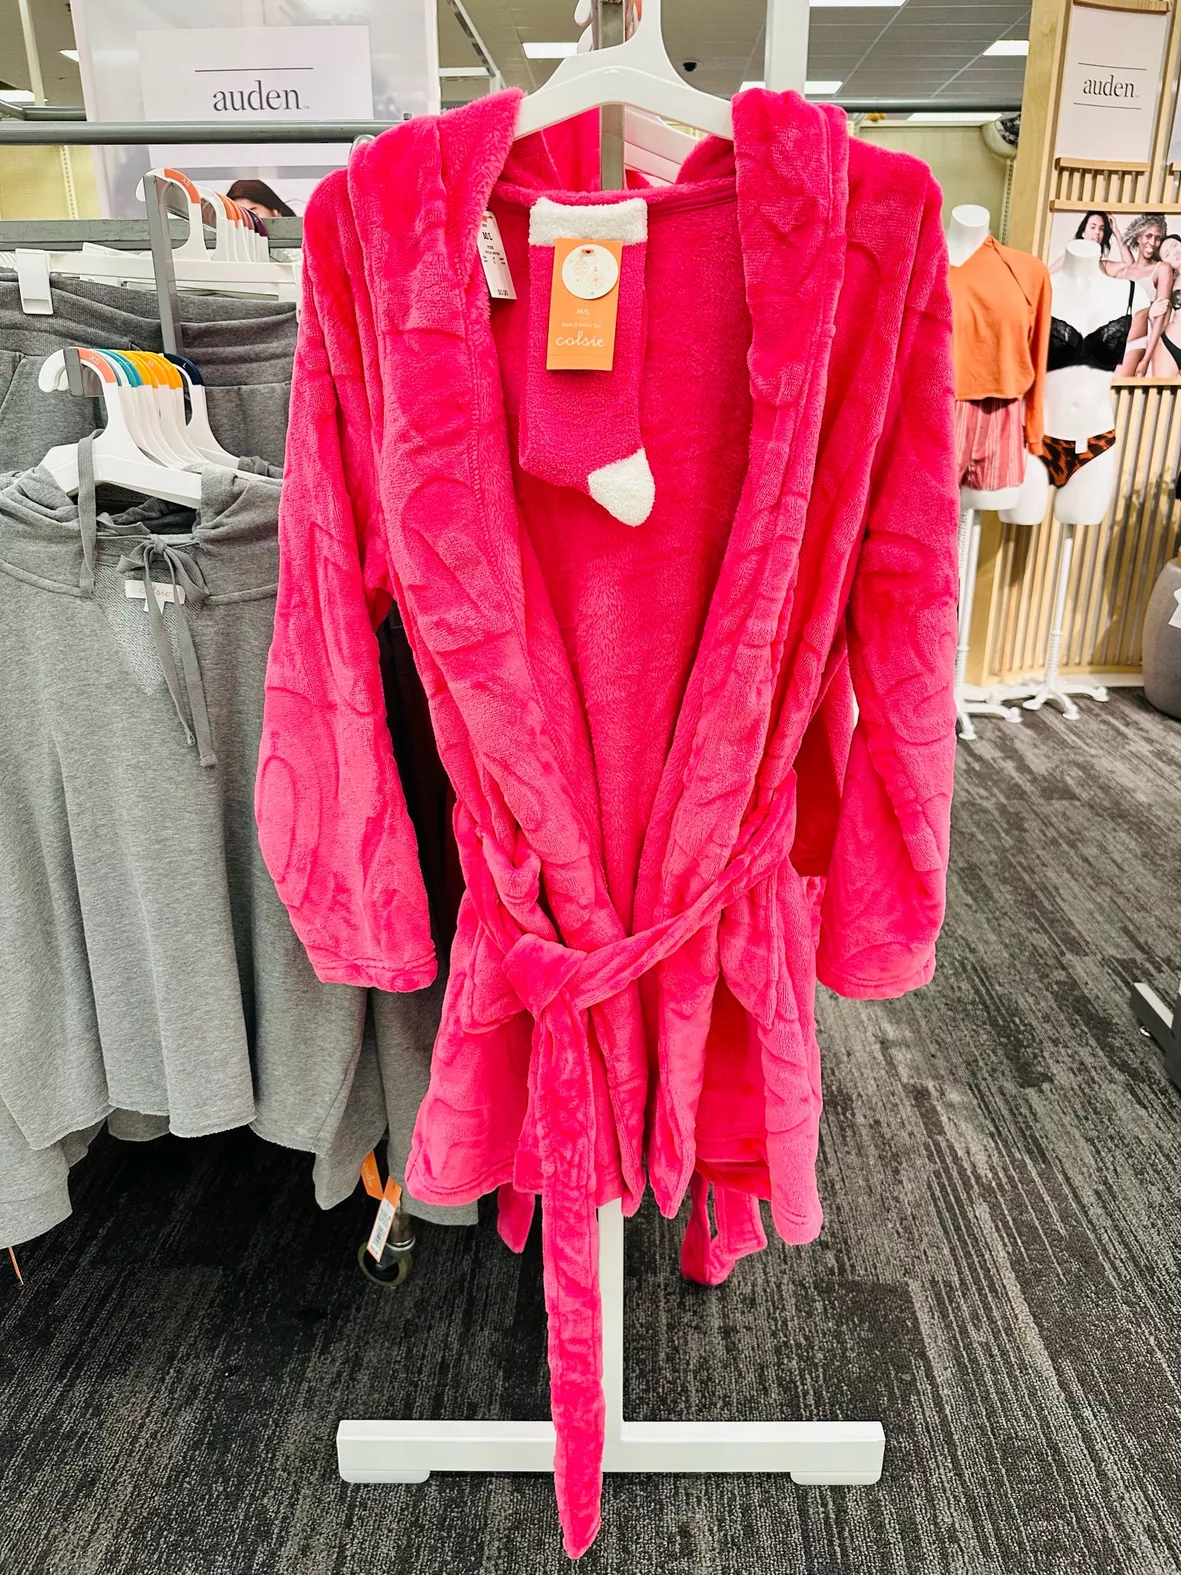 new at target - cozy robe and sock set by colsie! just in time for